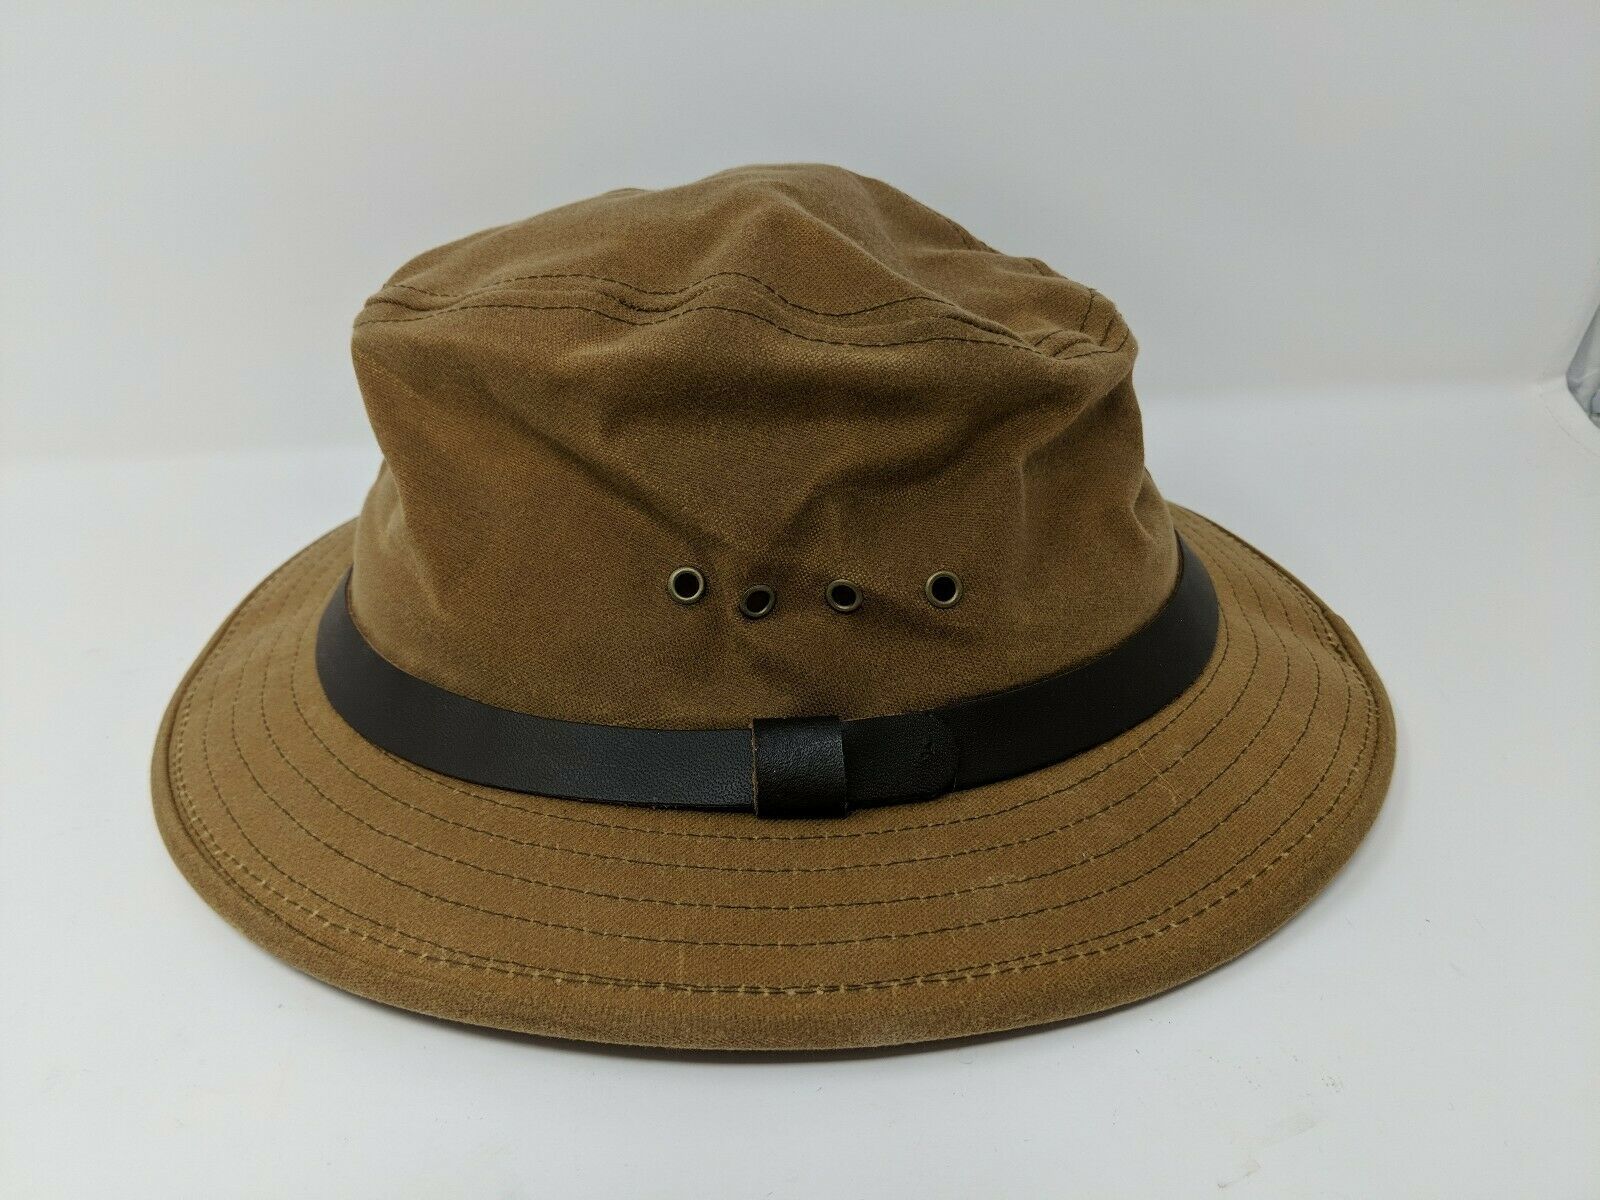 Filson Waxed Oil Cloth Coated Canvas Fedora Hunting Outdoor Hat Size ...